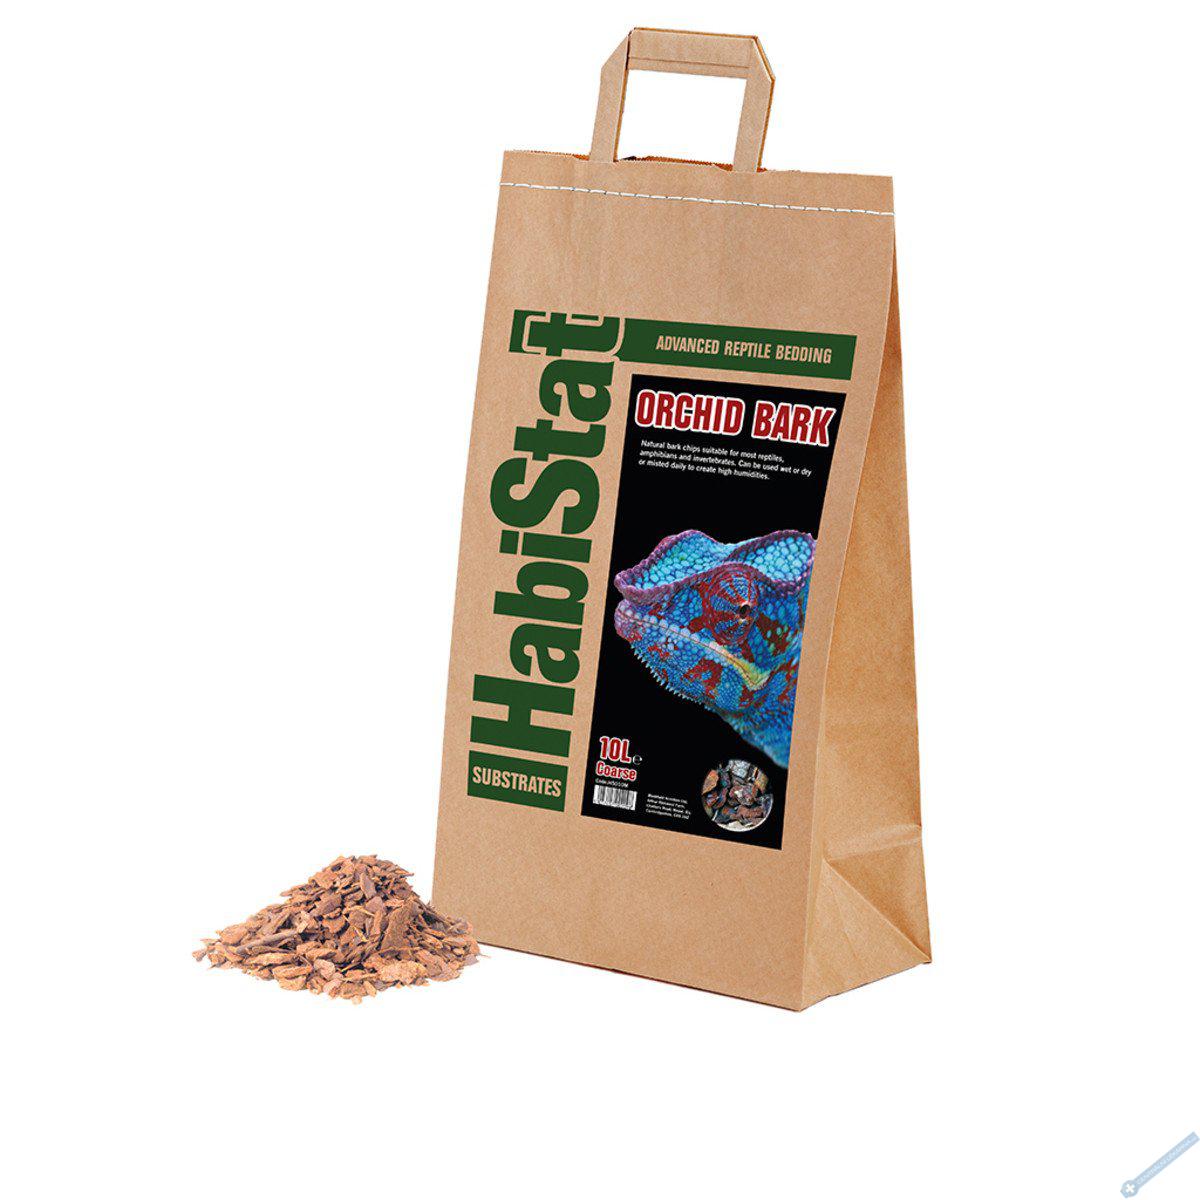 HabiStat Orchid Bark Substrate hrub 10l